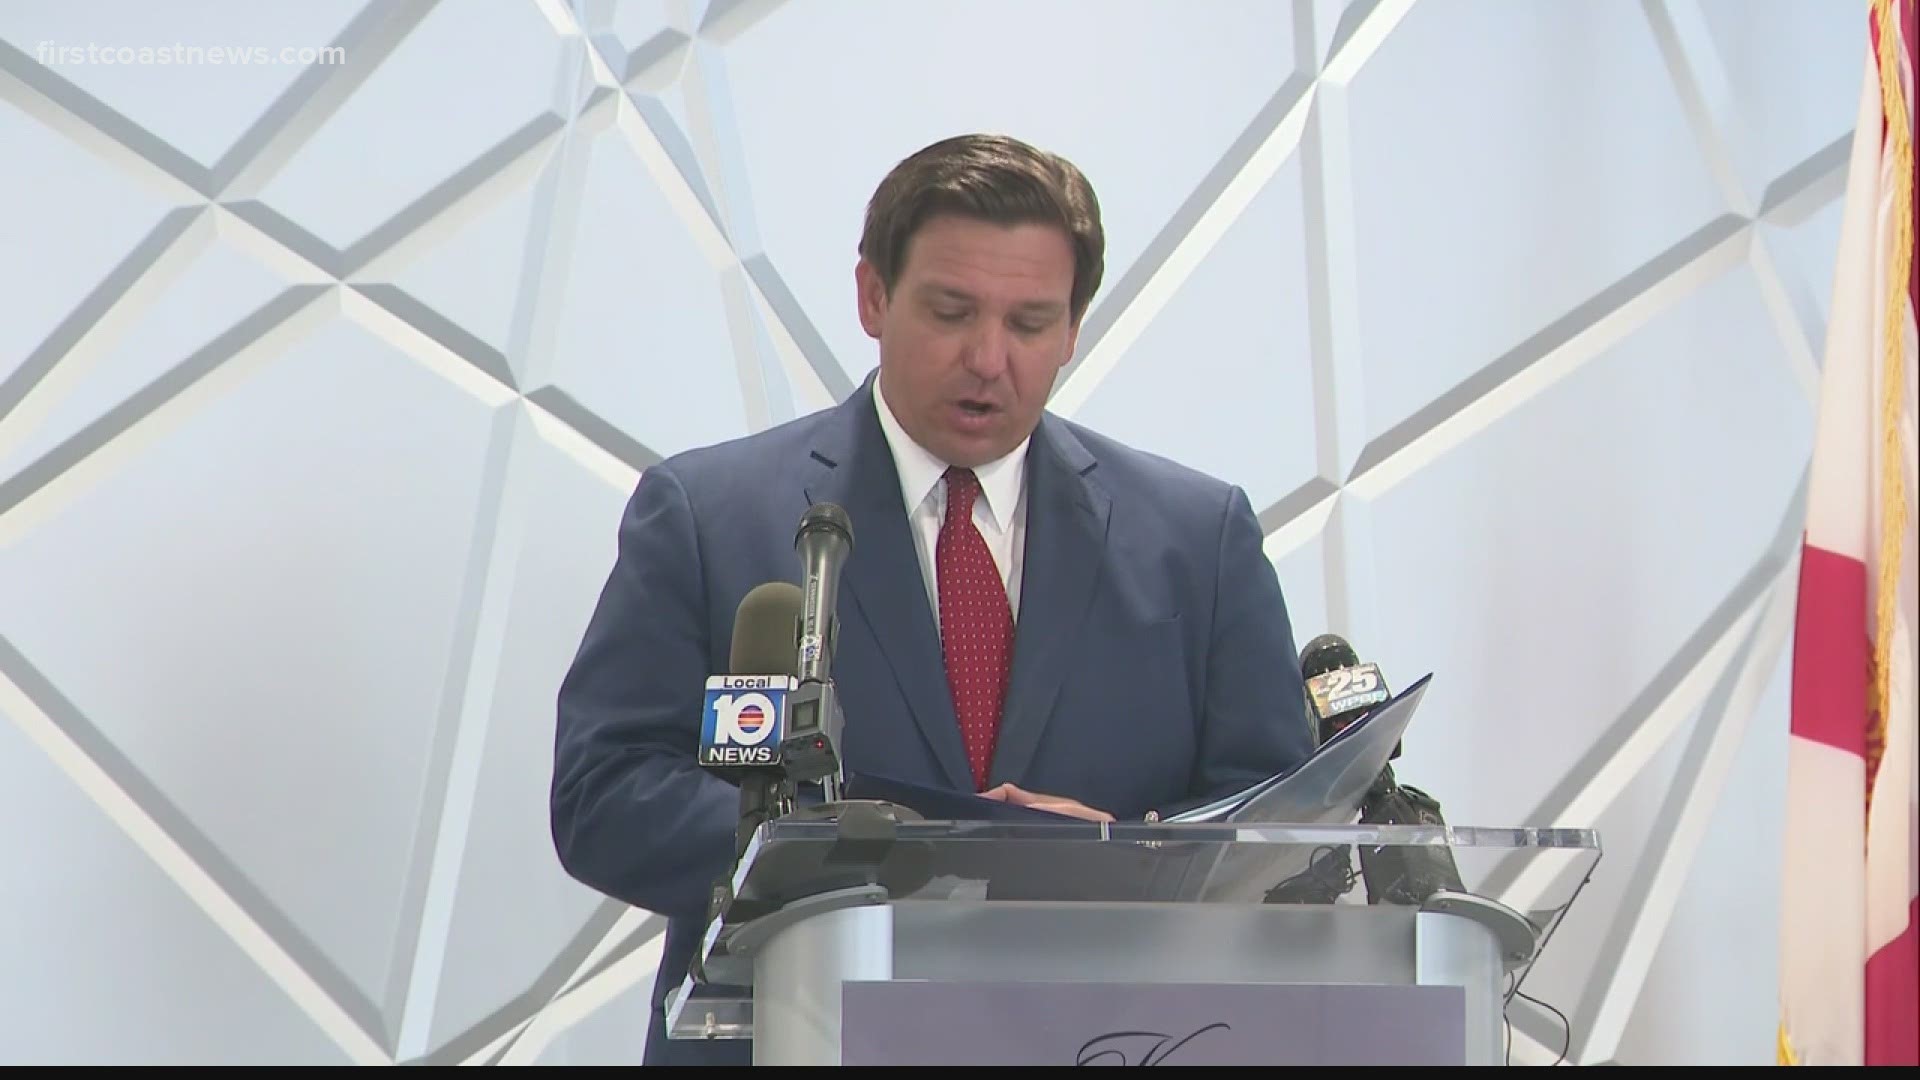 "Currently we do not have enough vaccines on hand for all 4 million+ senior citizens in the state of Florida," DeSantis said. "We will get there."